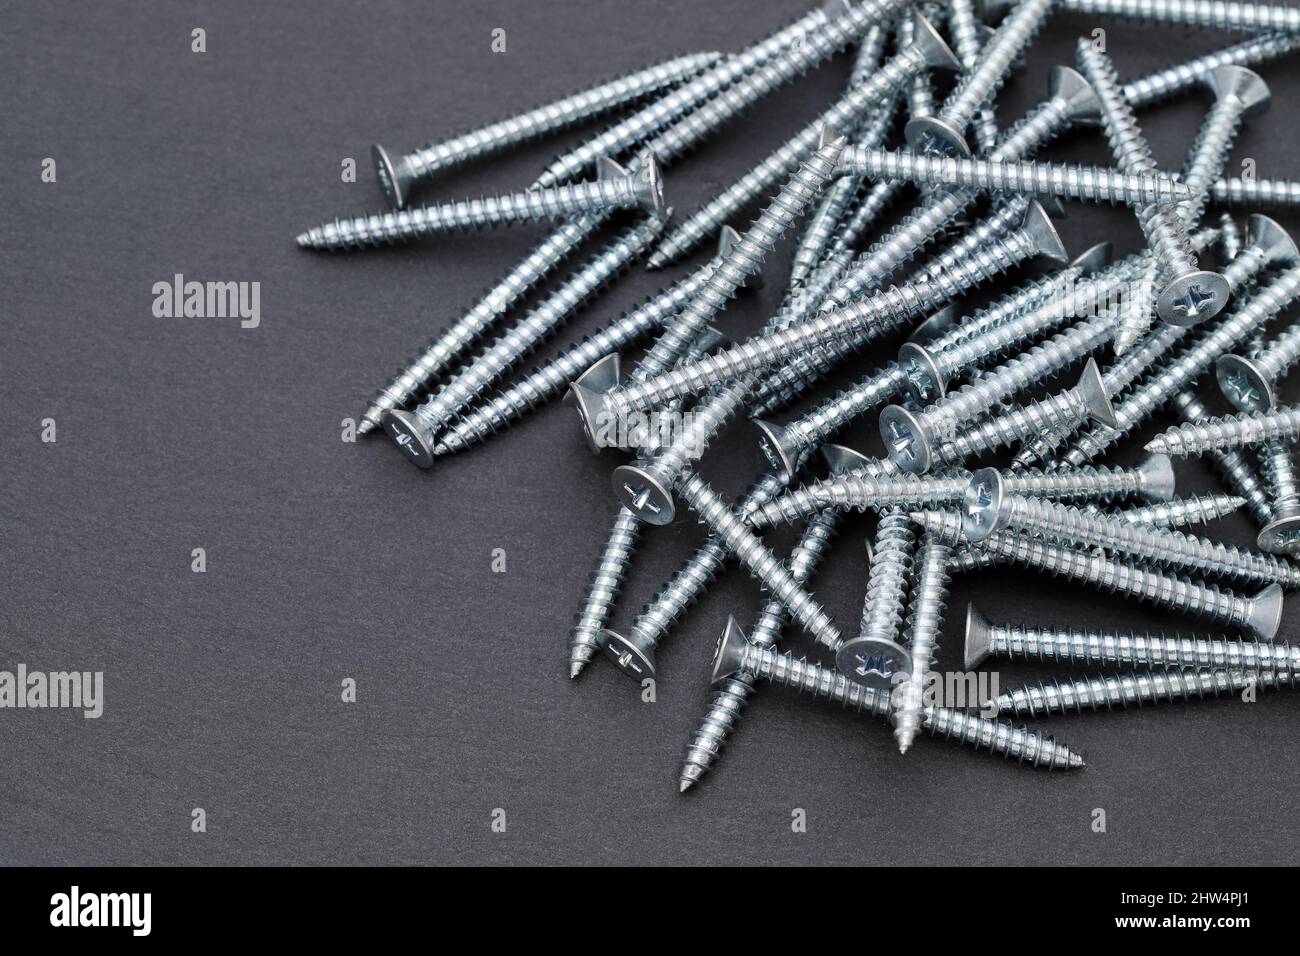 Pile of silver metallic tapping screws on black background Stock Photo